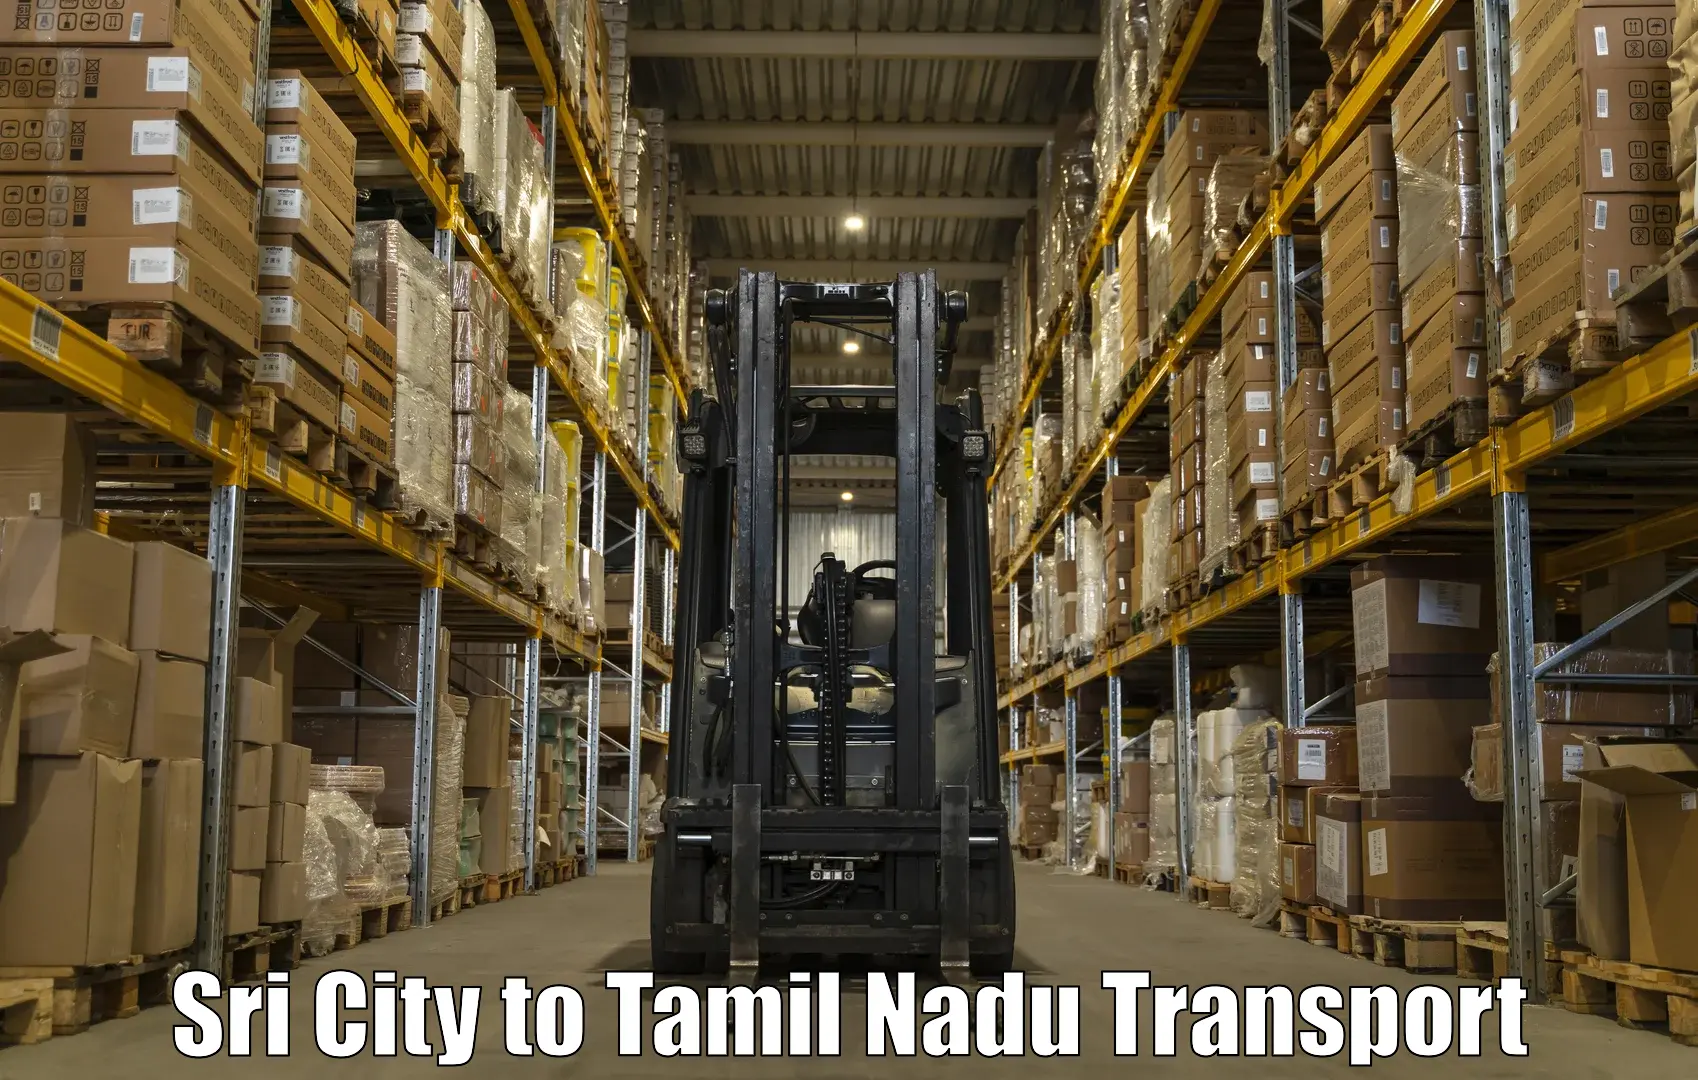 Cargo transport services Sri City to Bharath Institute of Higher Education and Research Chennai